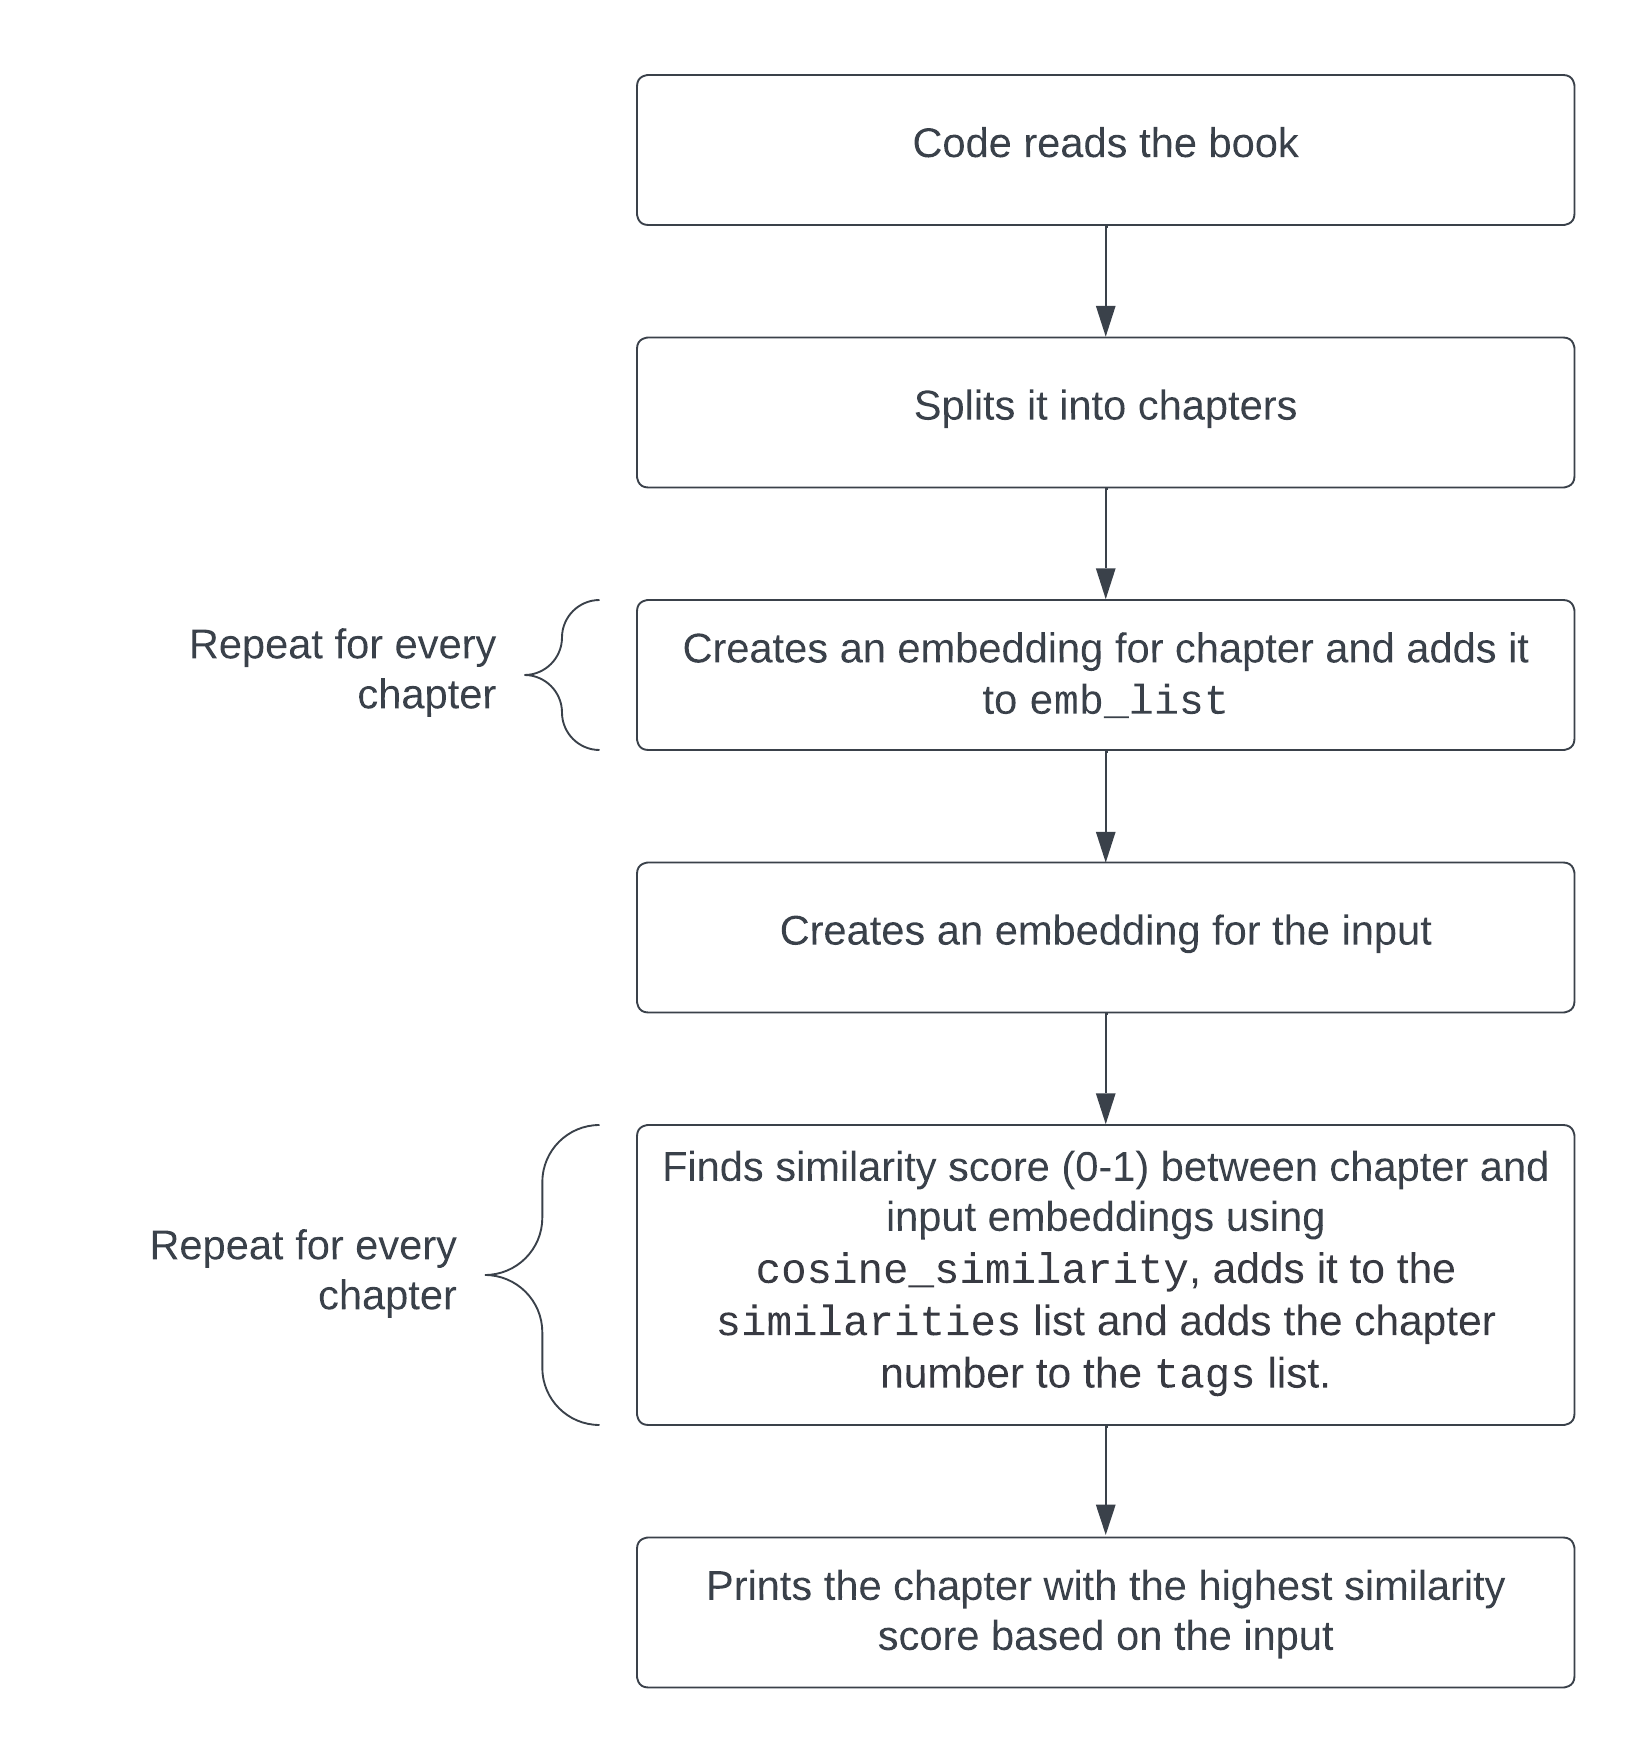 Flowchart of how the embedding code works